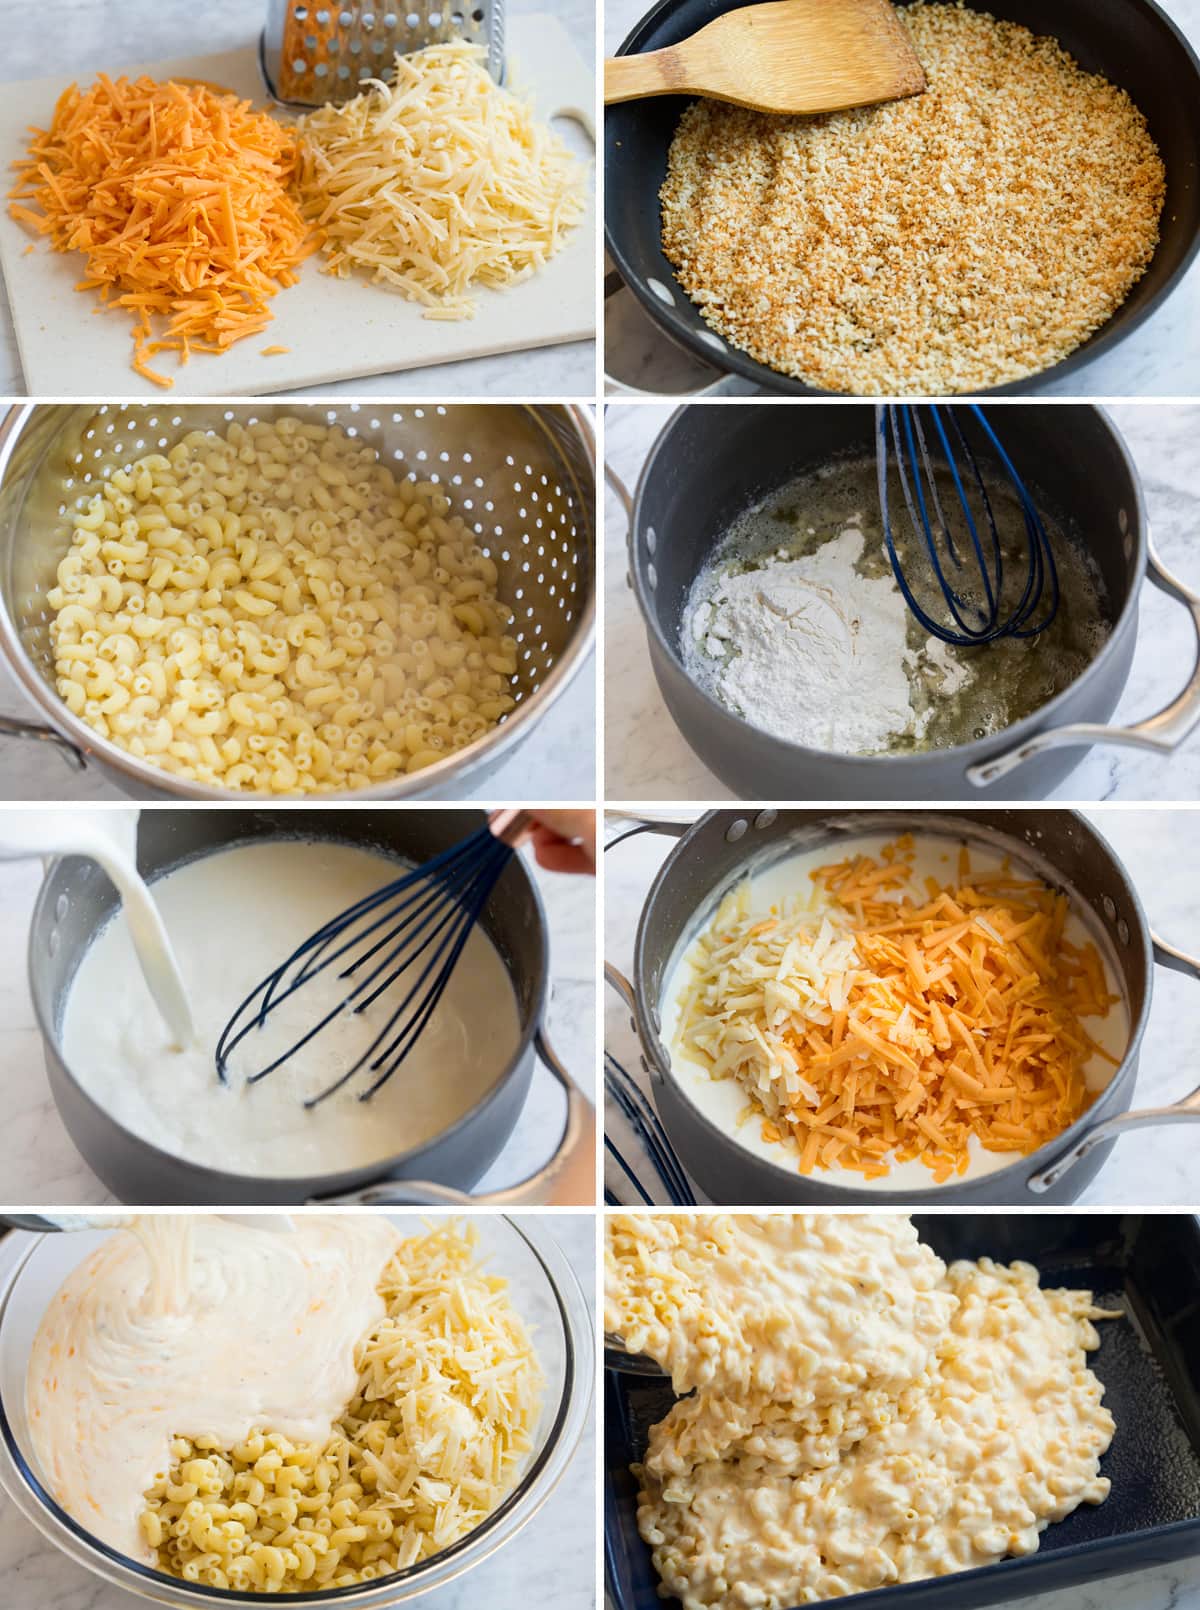 Showing steps to make baked macaroni and cheese.